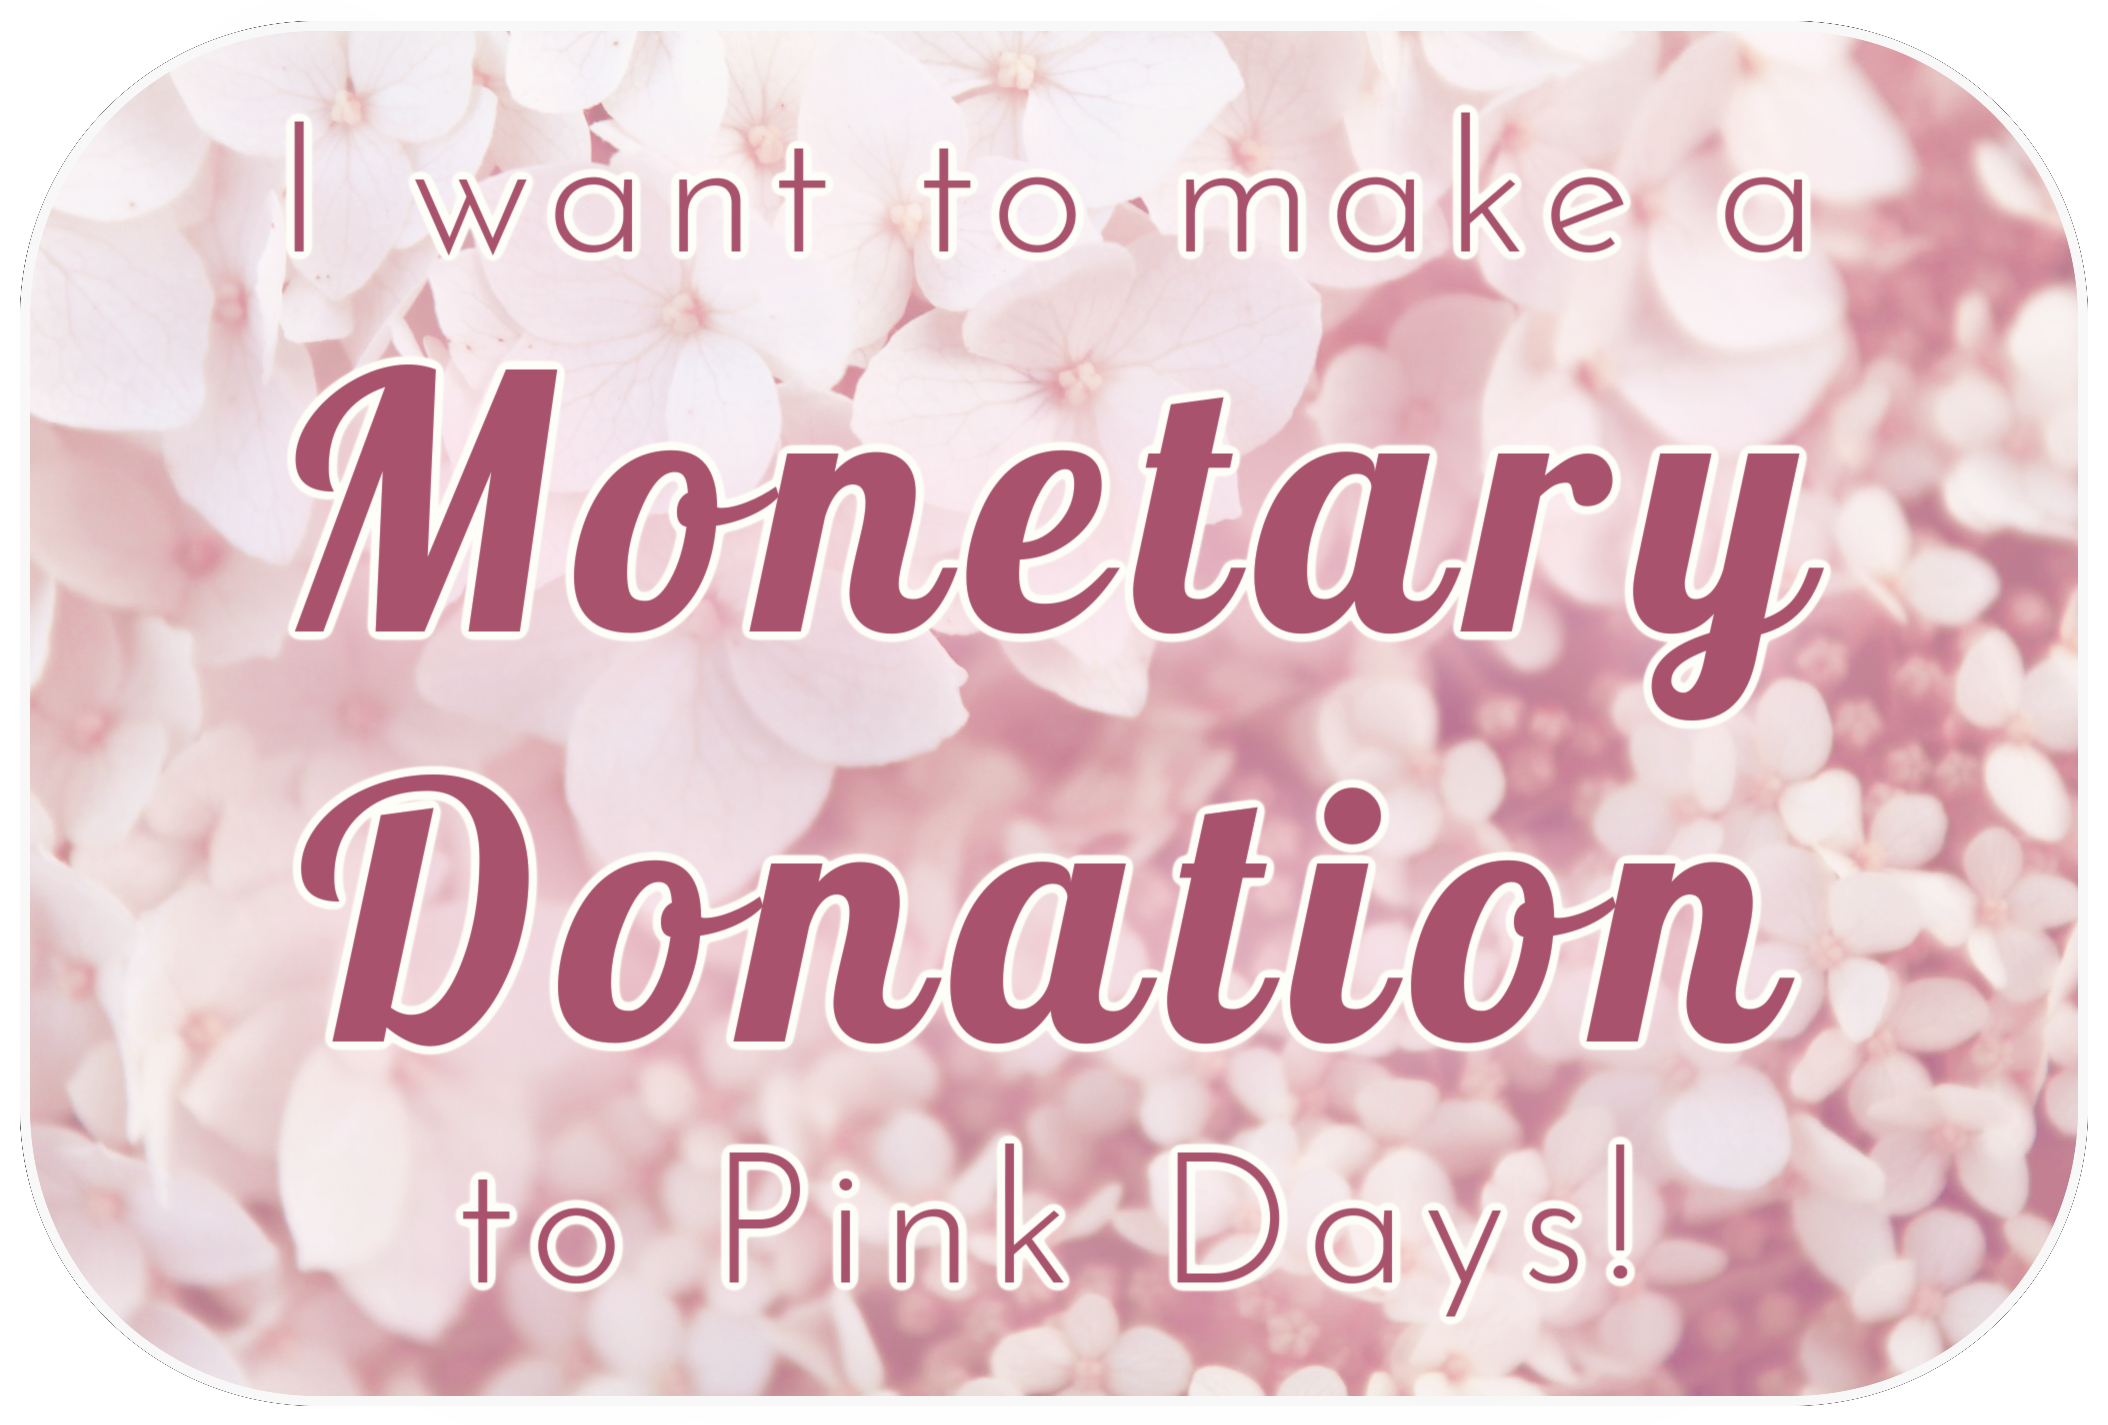 I want to make a Monetary Donation to Pink Days!